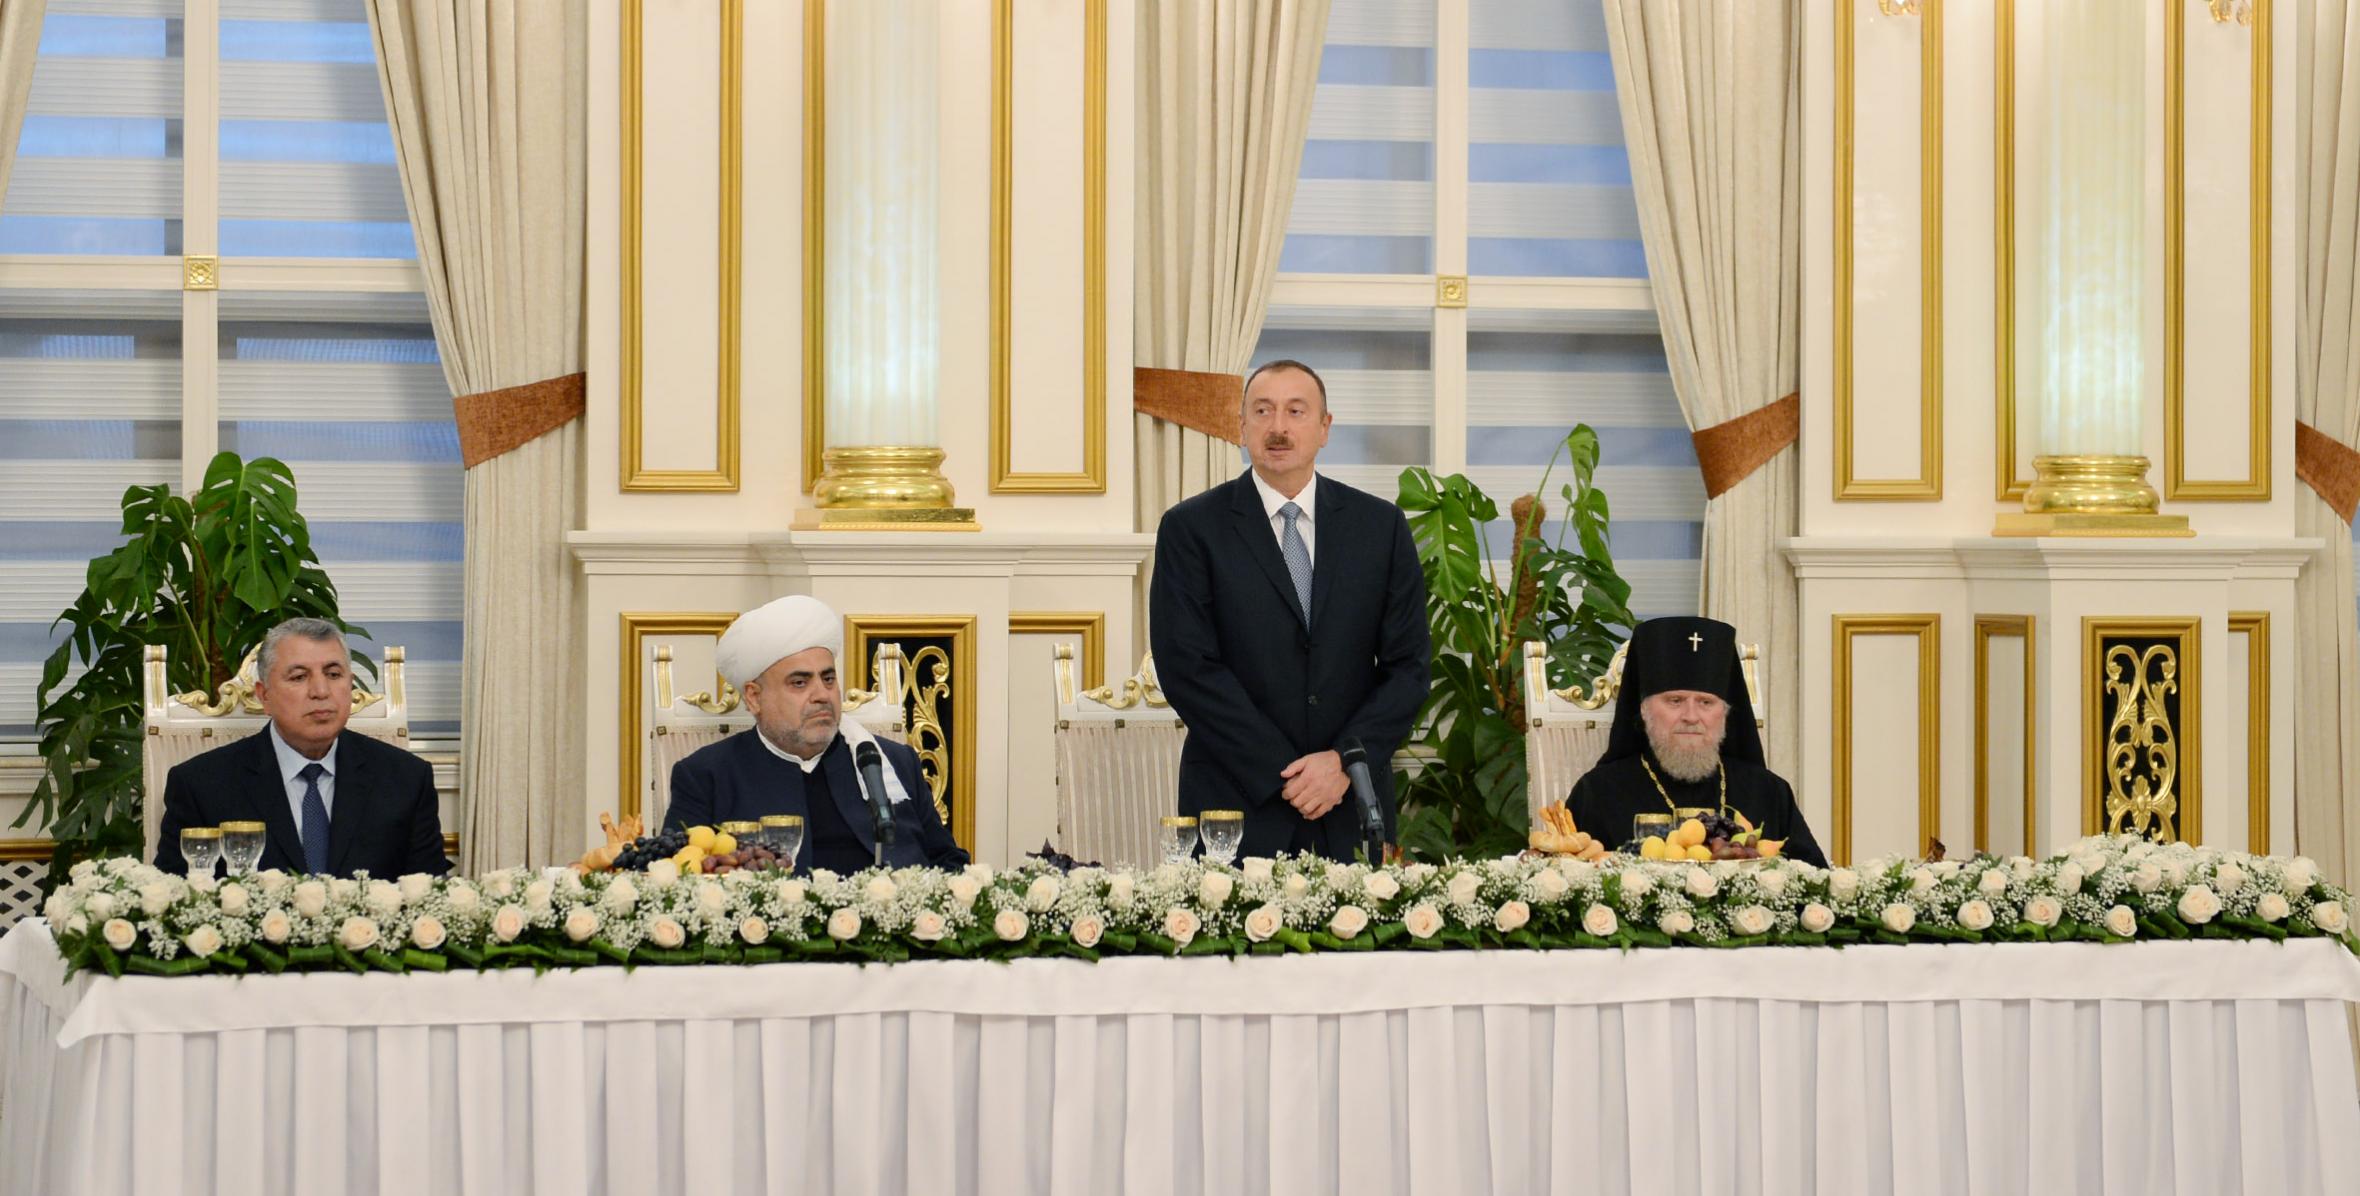 Ilham Aliyev attended the Iftar ceremony on the occasion of the holy month of Ramadan